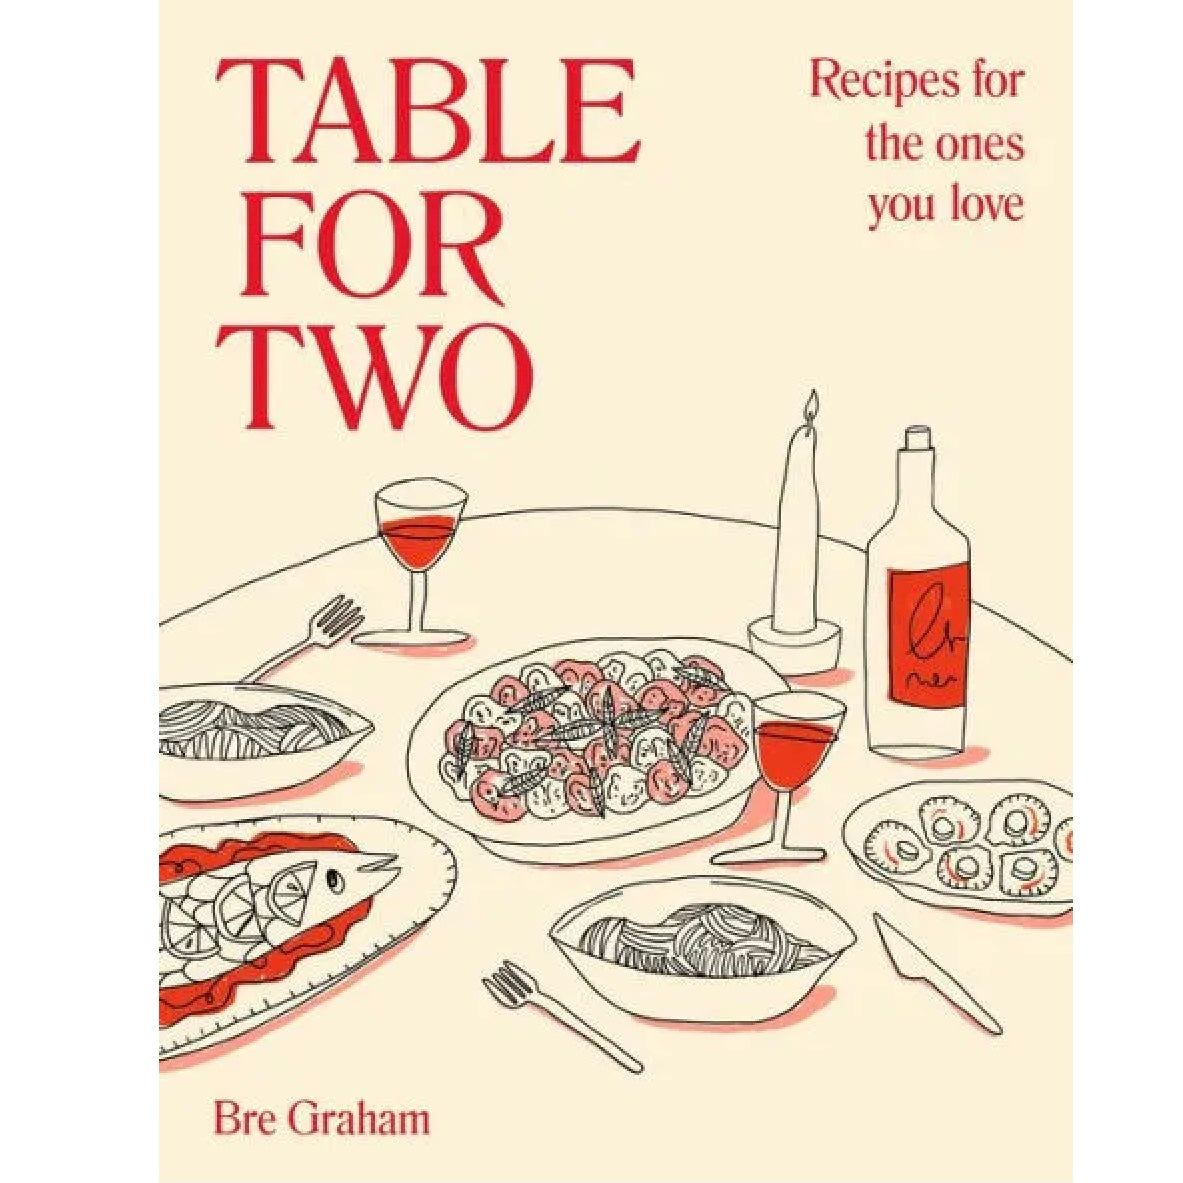 Table for Two: Recipes for the Ones you Love